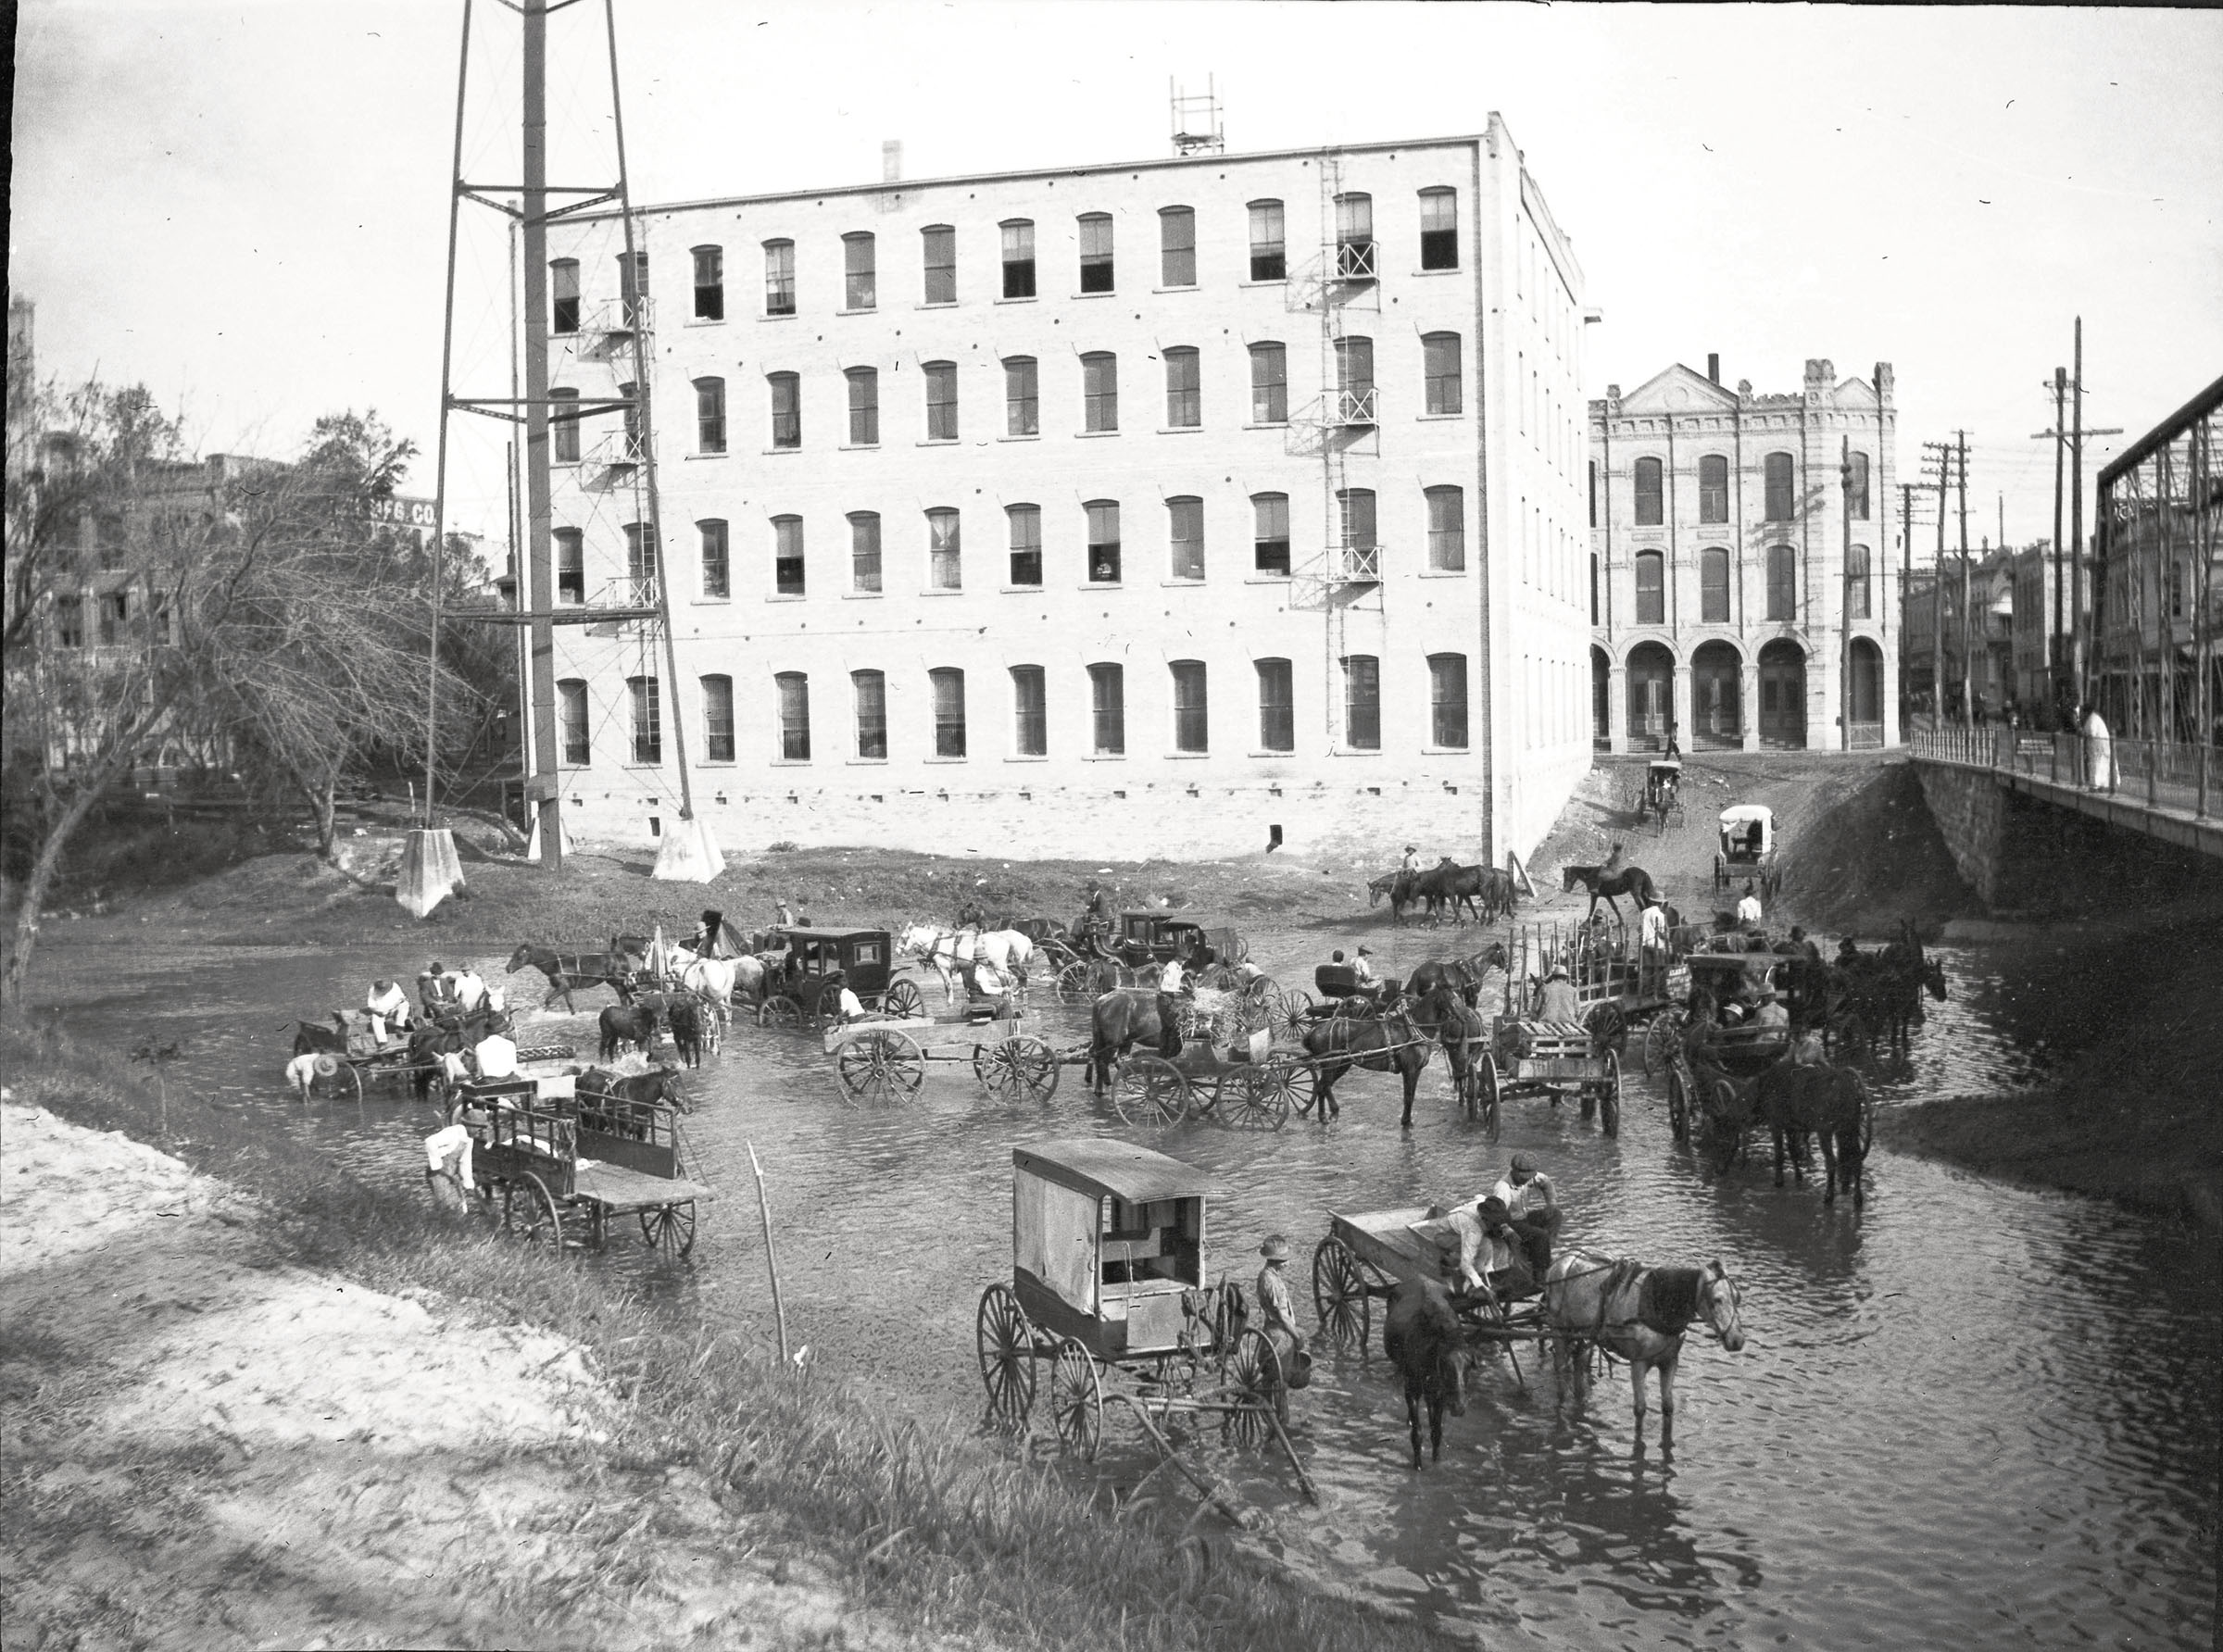 A large group of horses and buggies move through the water in front of a white building in a vintage photograph